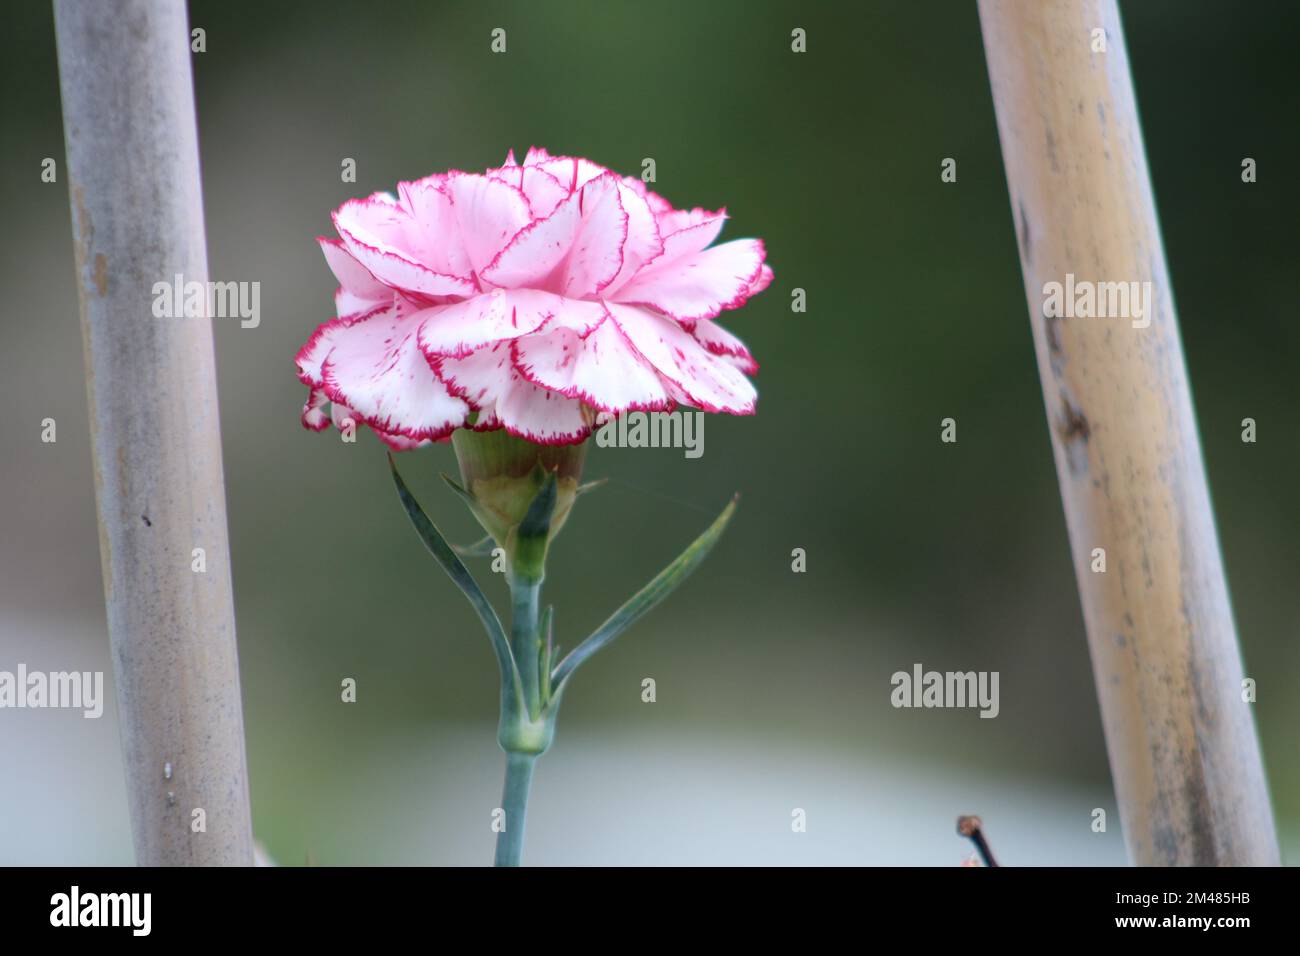 A beautiful carnation flowers outdoors. Сarnation in the garden. Stock Photo